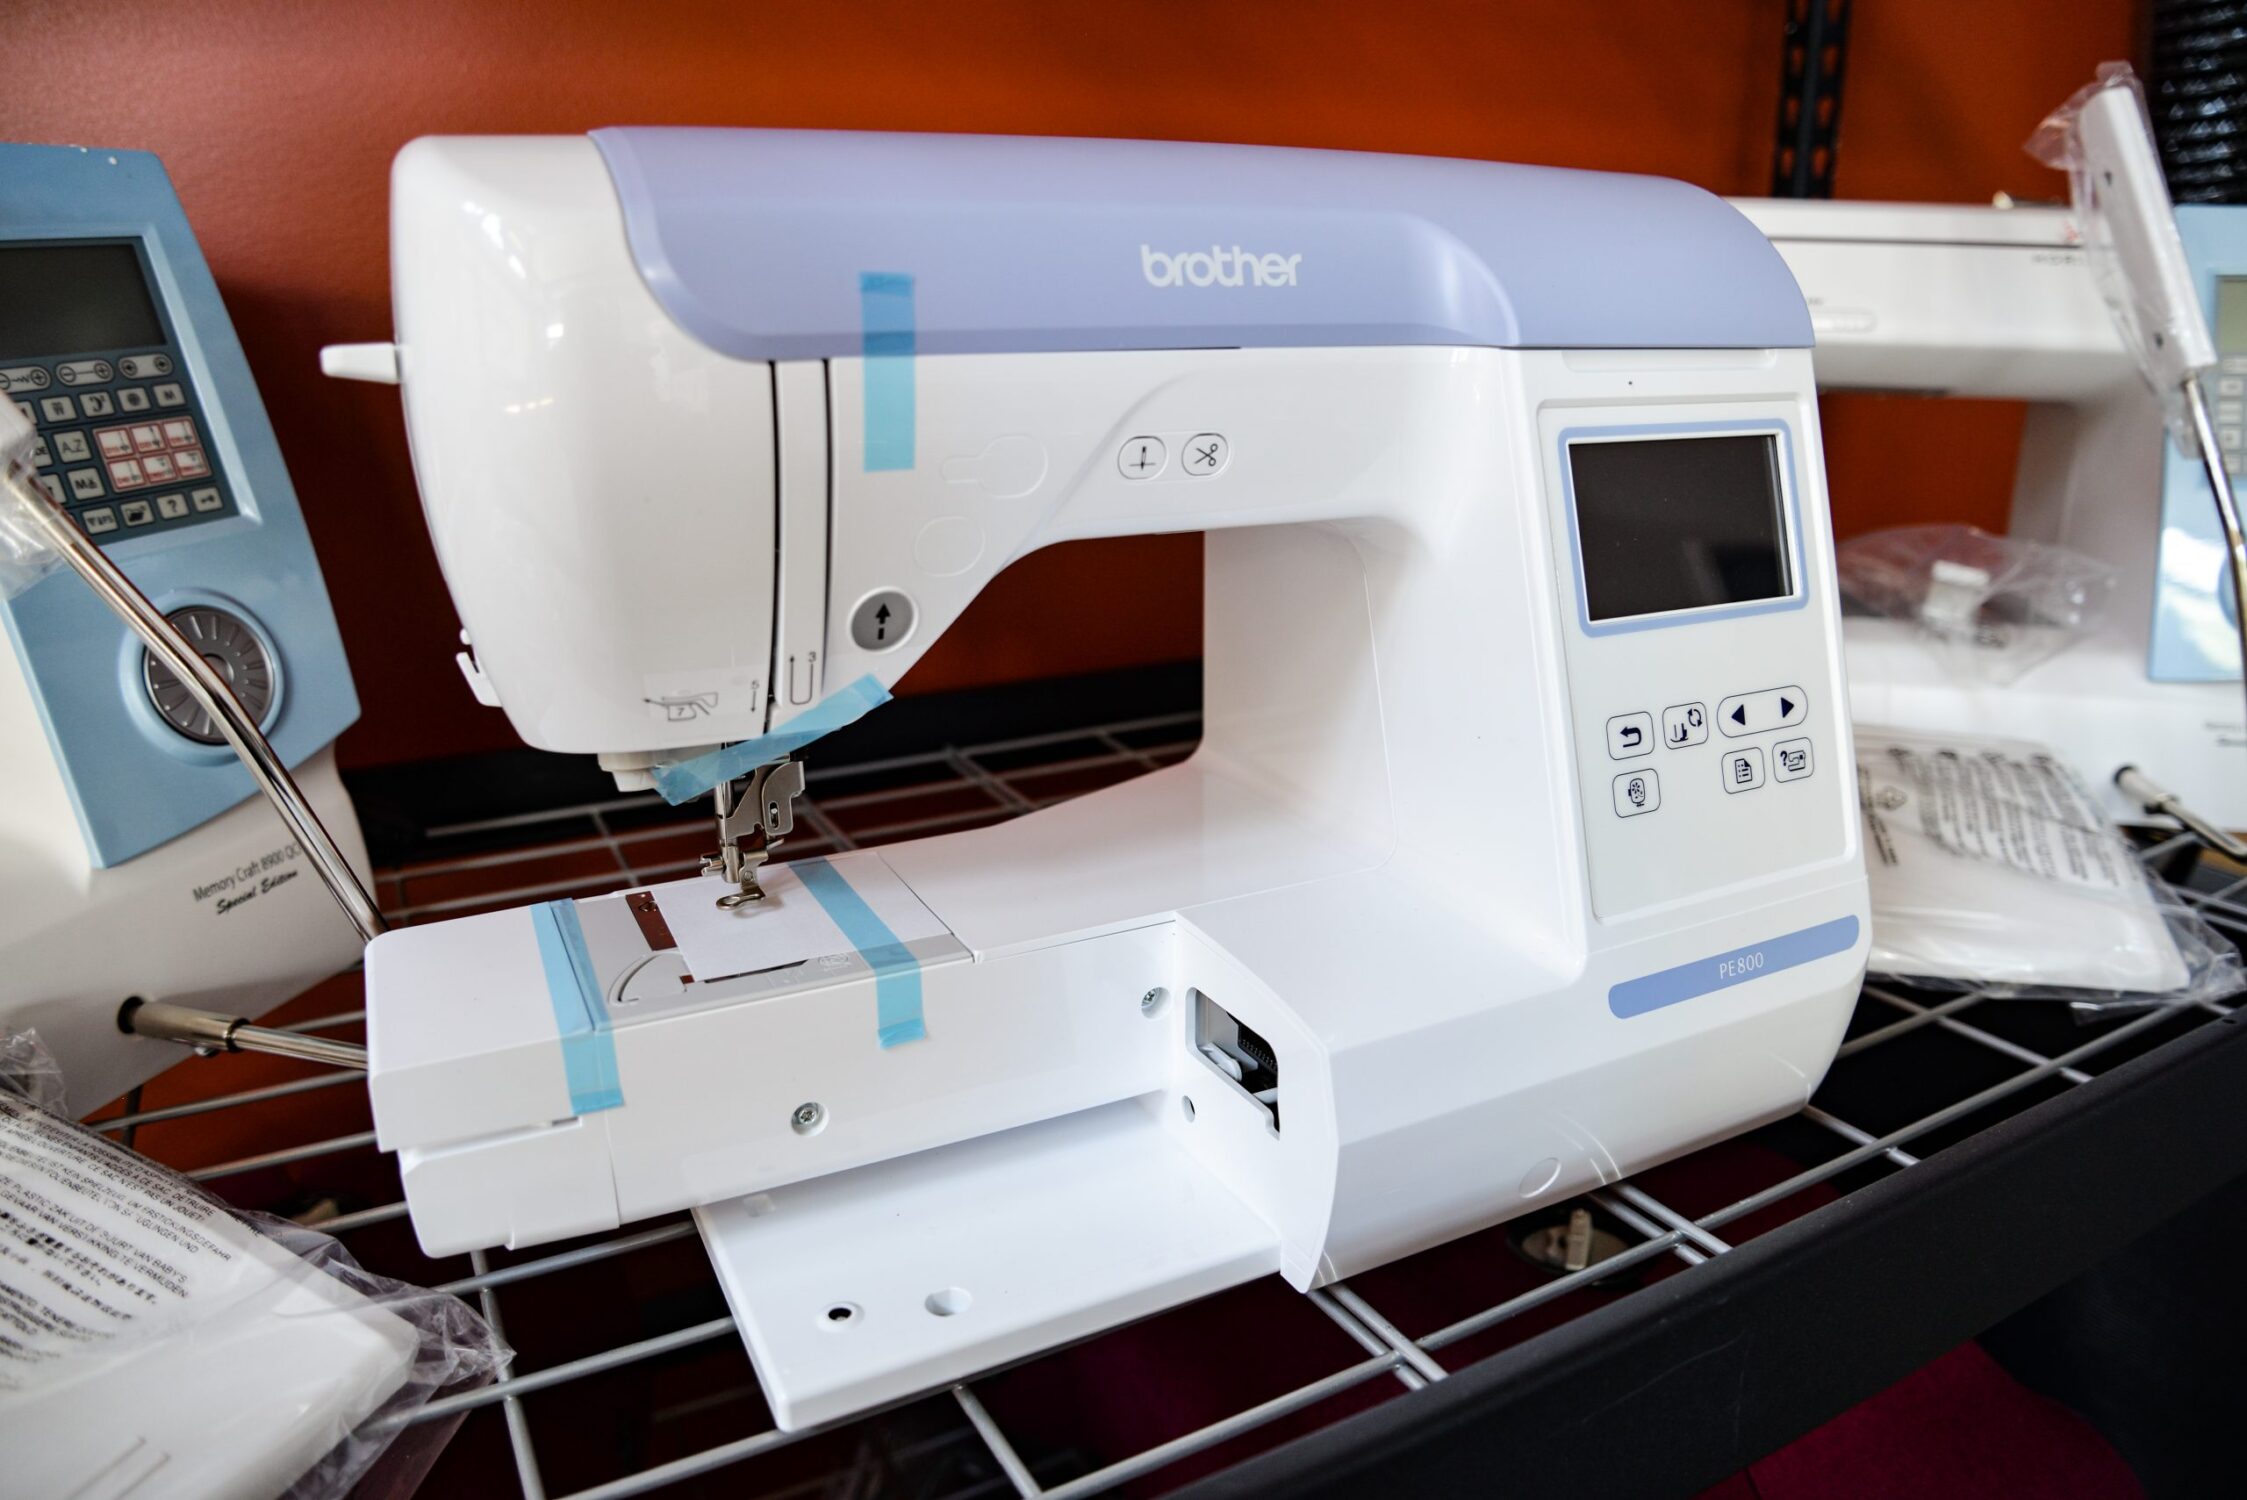 Brother PE800 Embroidery Machine - New Low Price! at